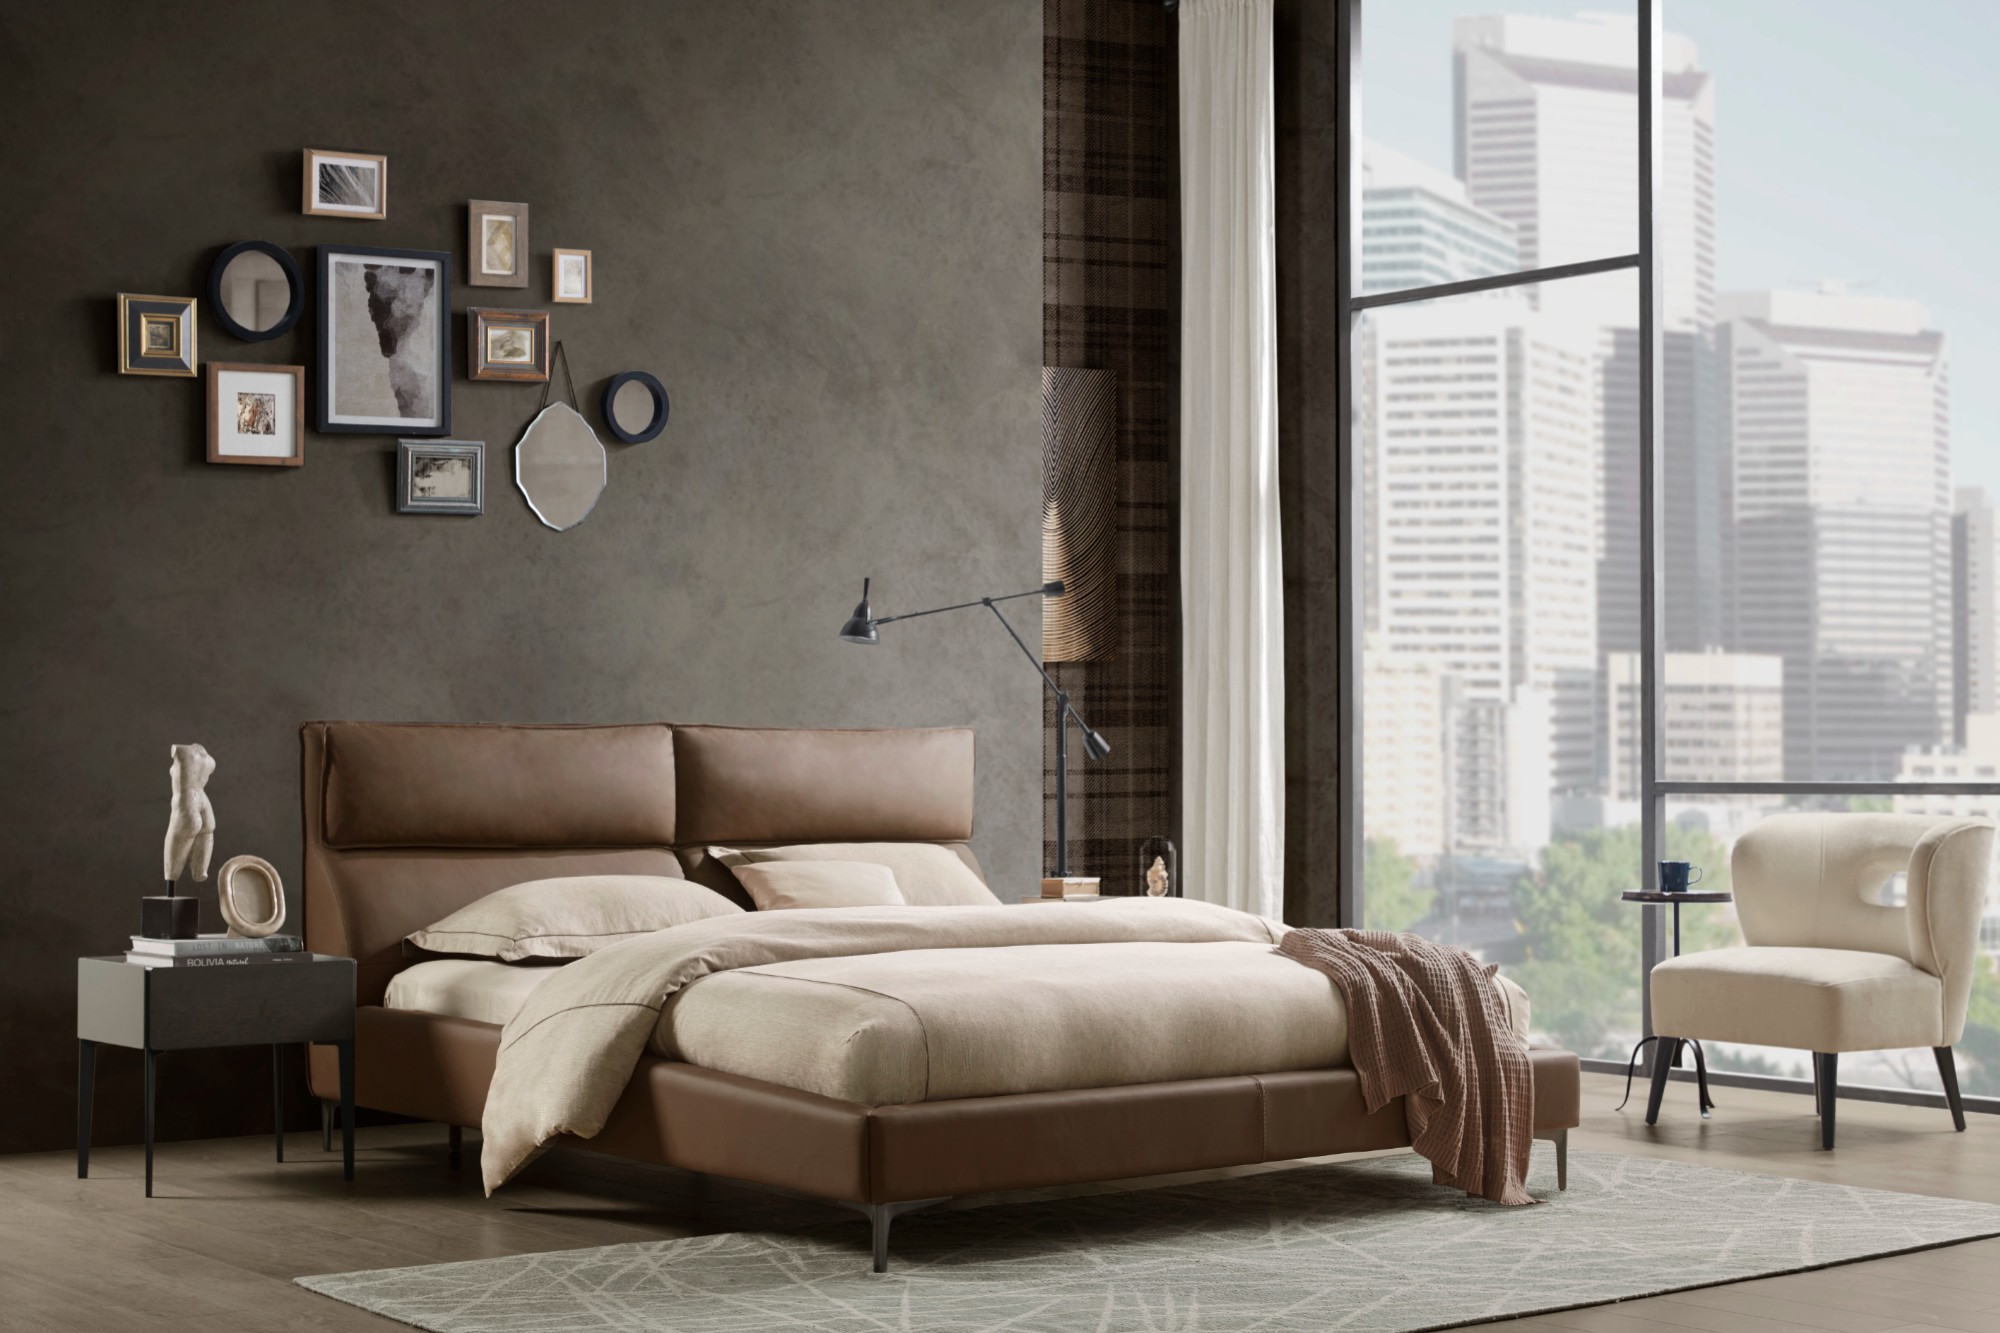 Kuka Home bed collection available at SUN&KRIS